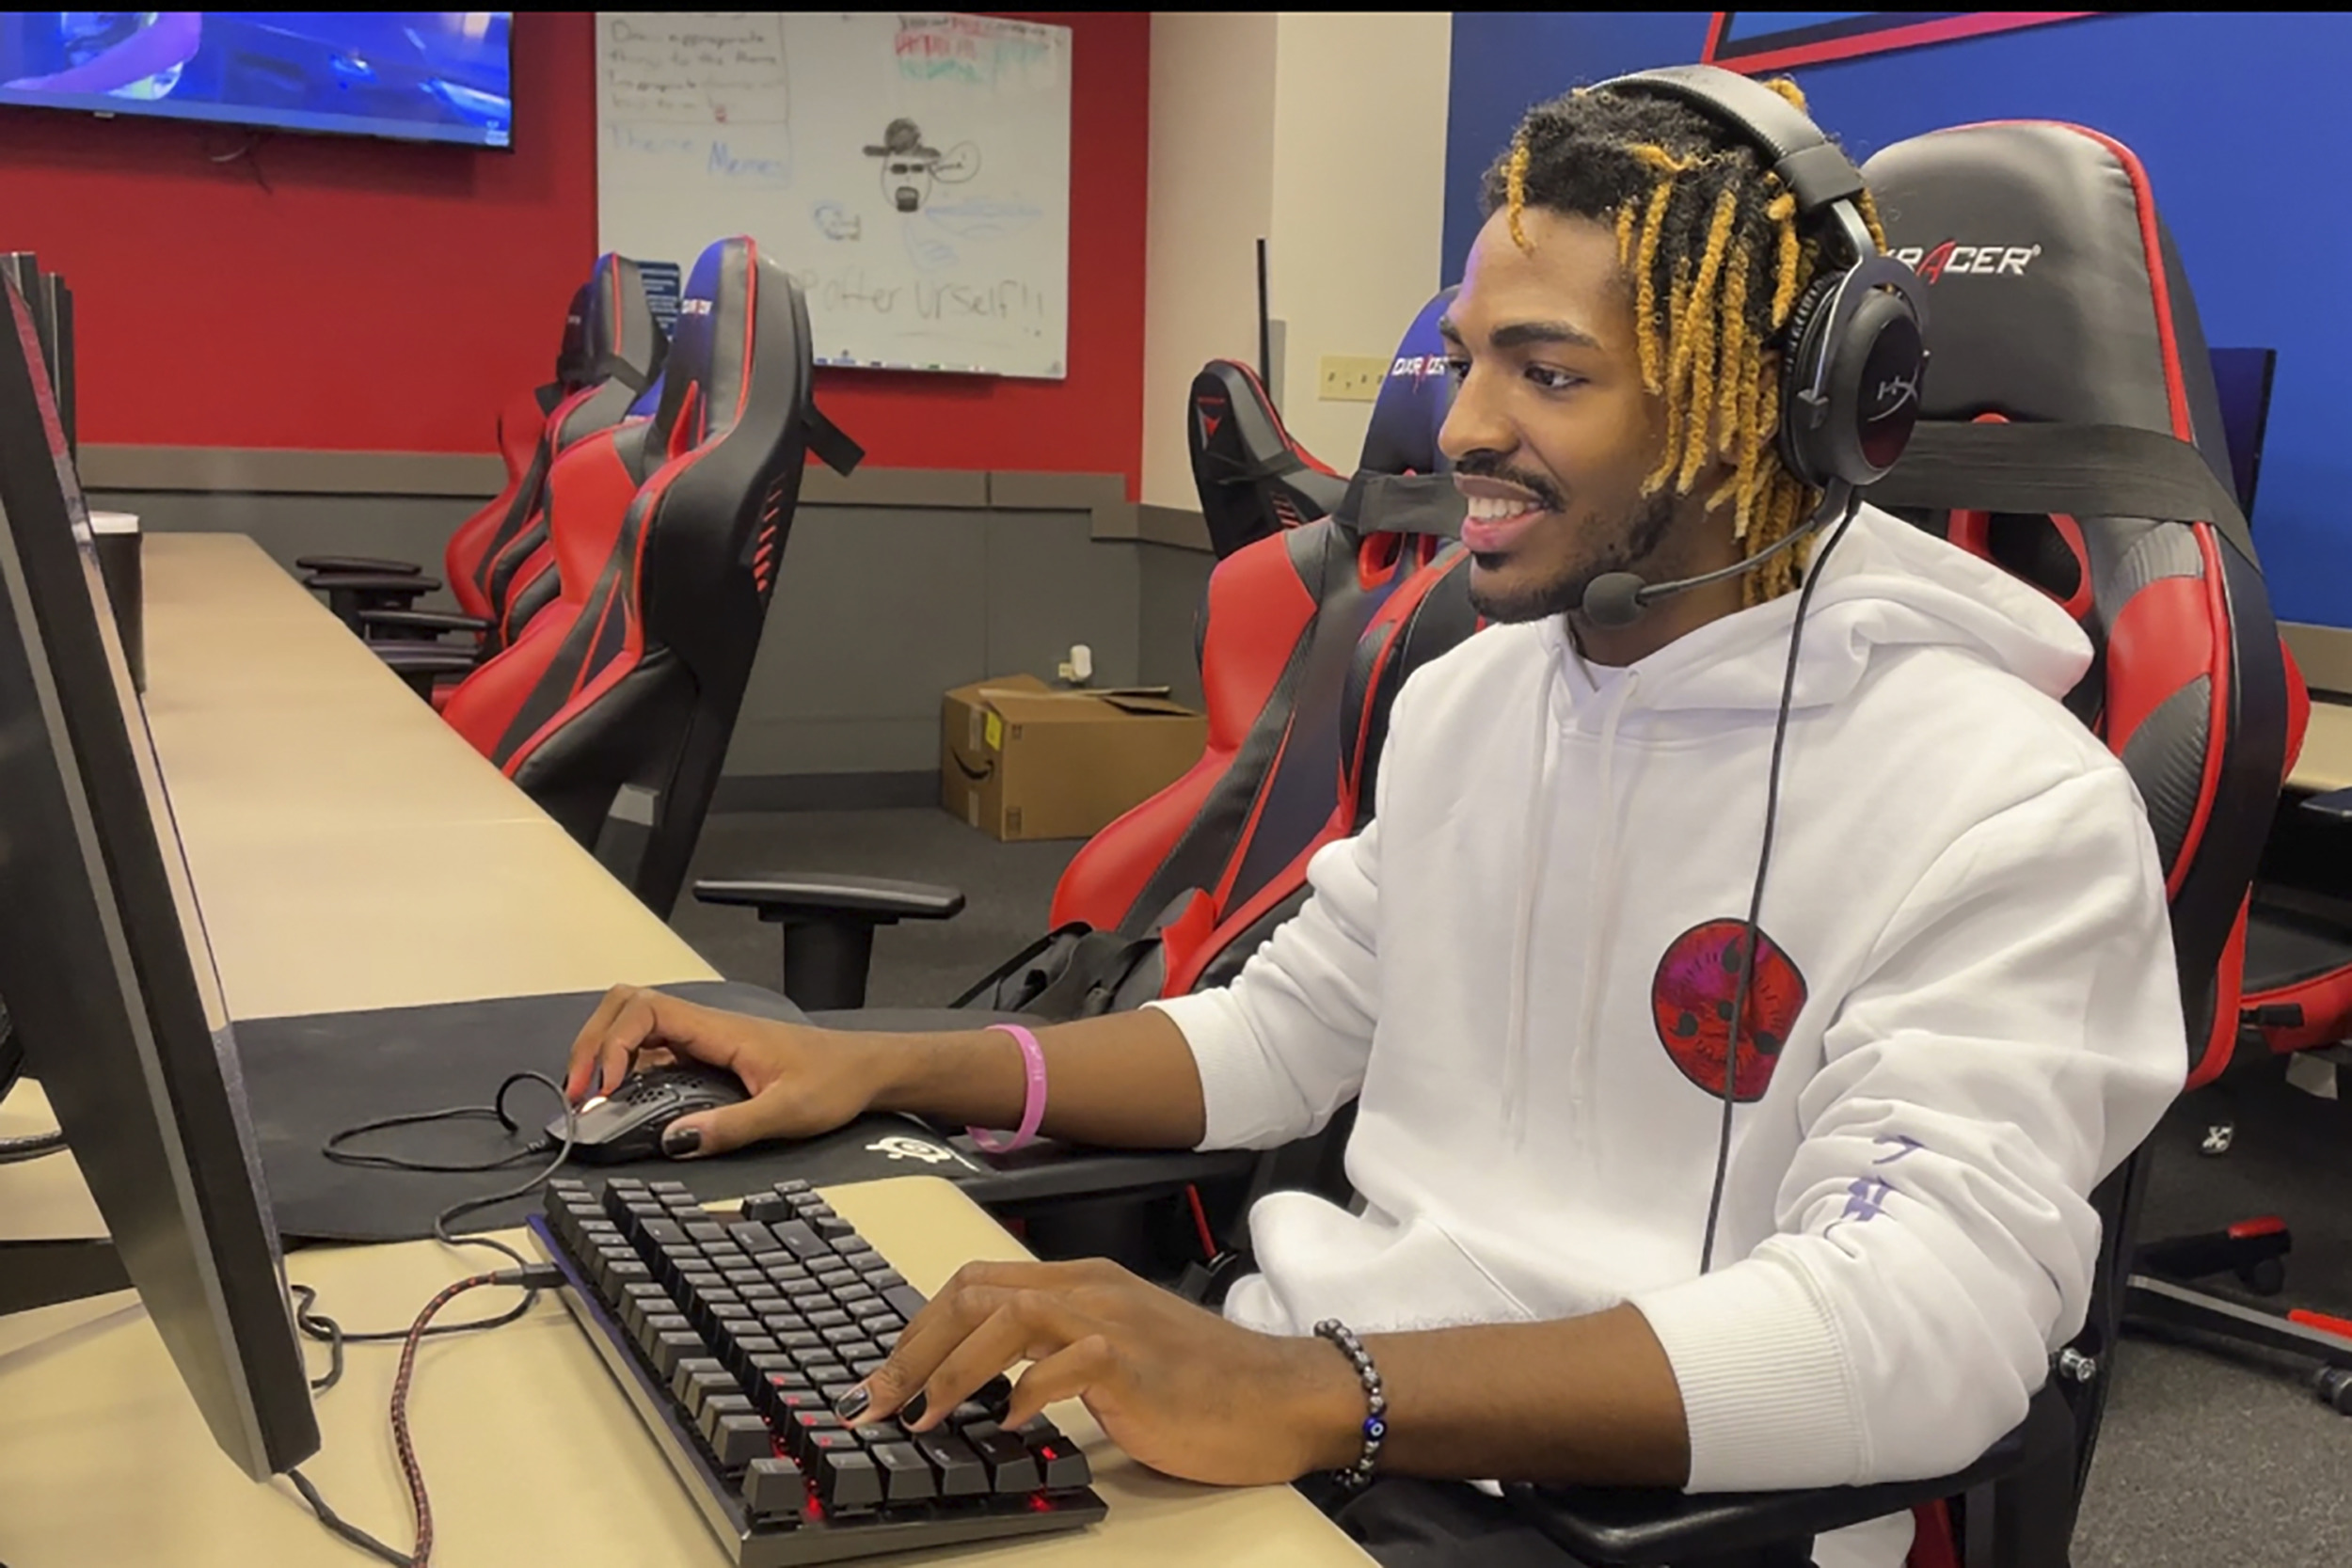 eSports: Young Black man with blonde dreads wearing headset and white sweatchirt hoodie sits ar desk with computer monitor using gaming keyboard in red and blue room with many computers